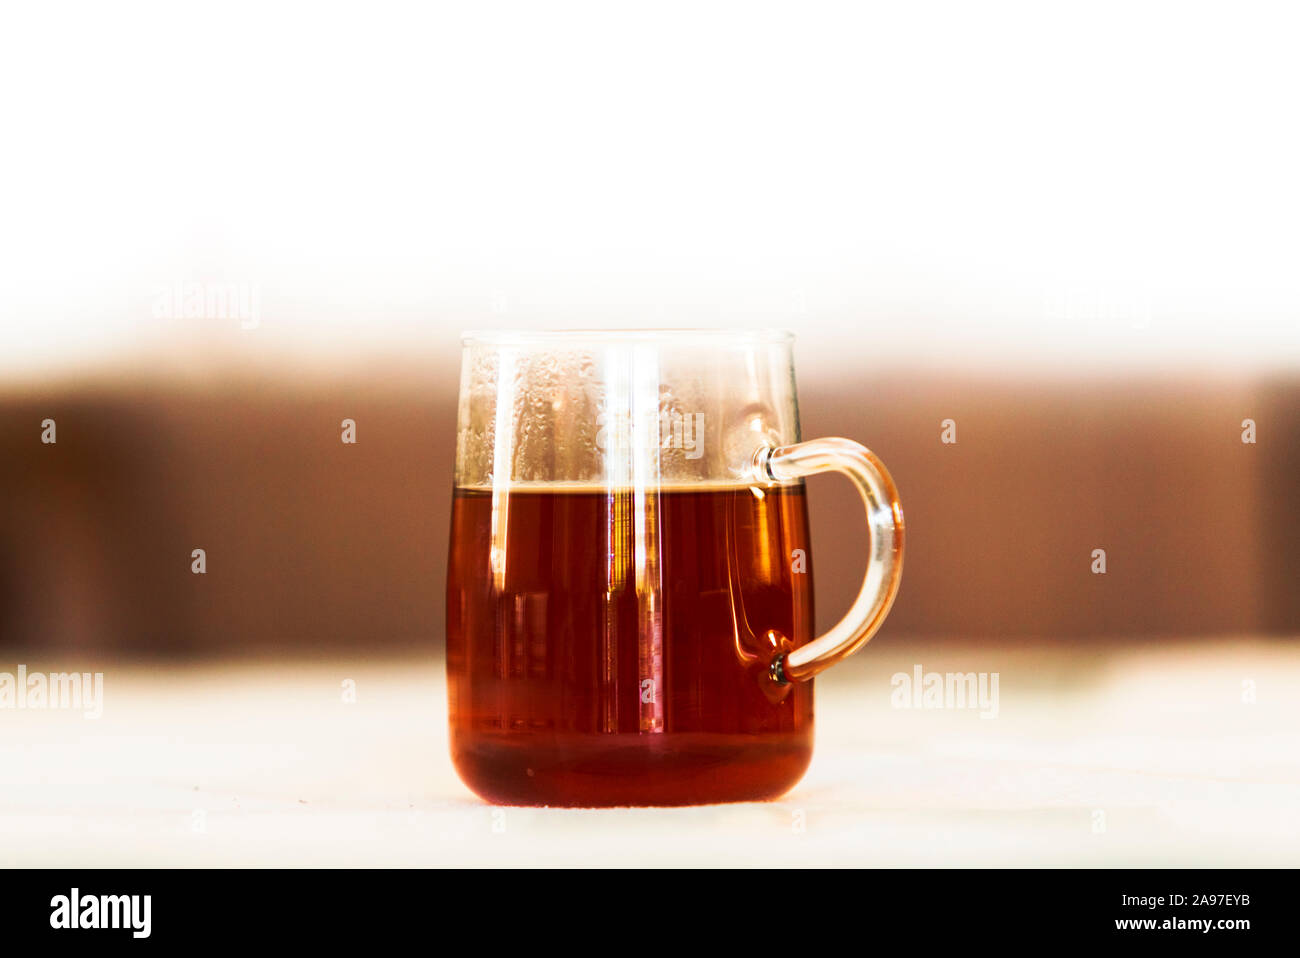 Close up of a glass cup of black tea in shallow depth of field image. Stock Photo